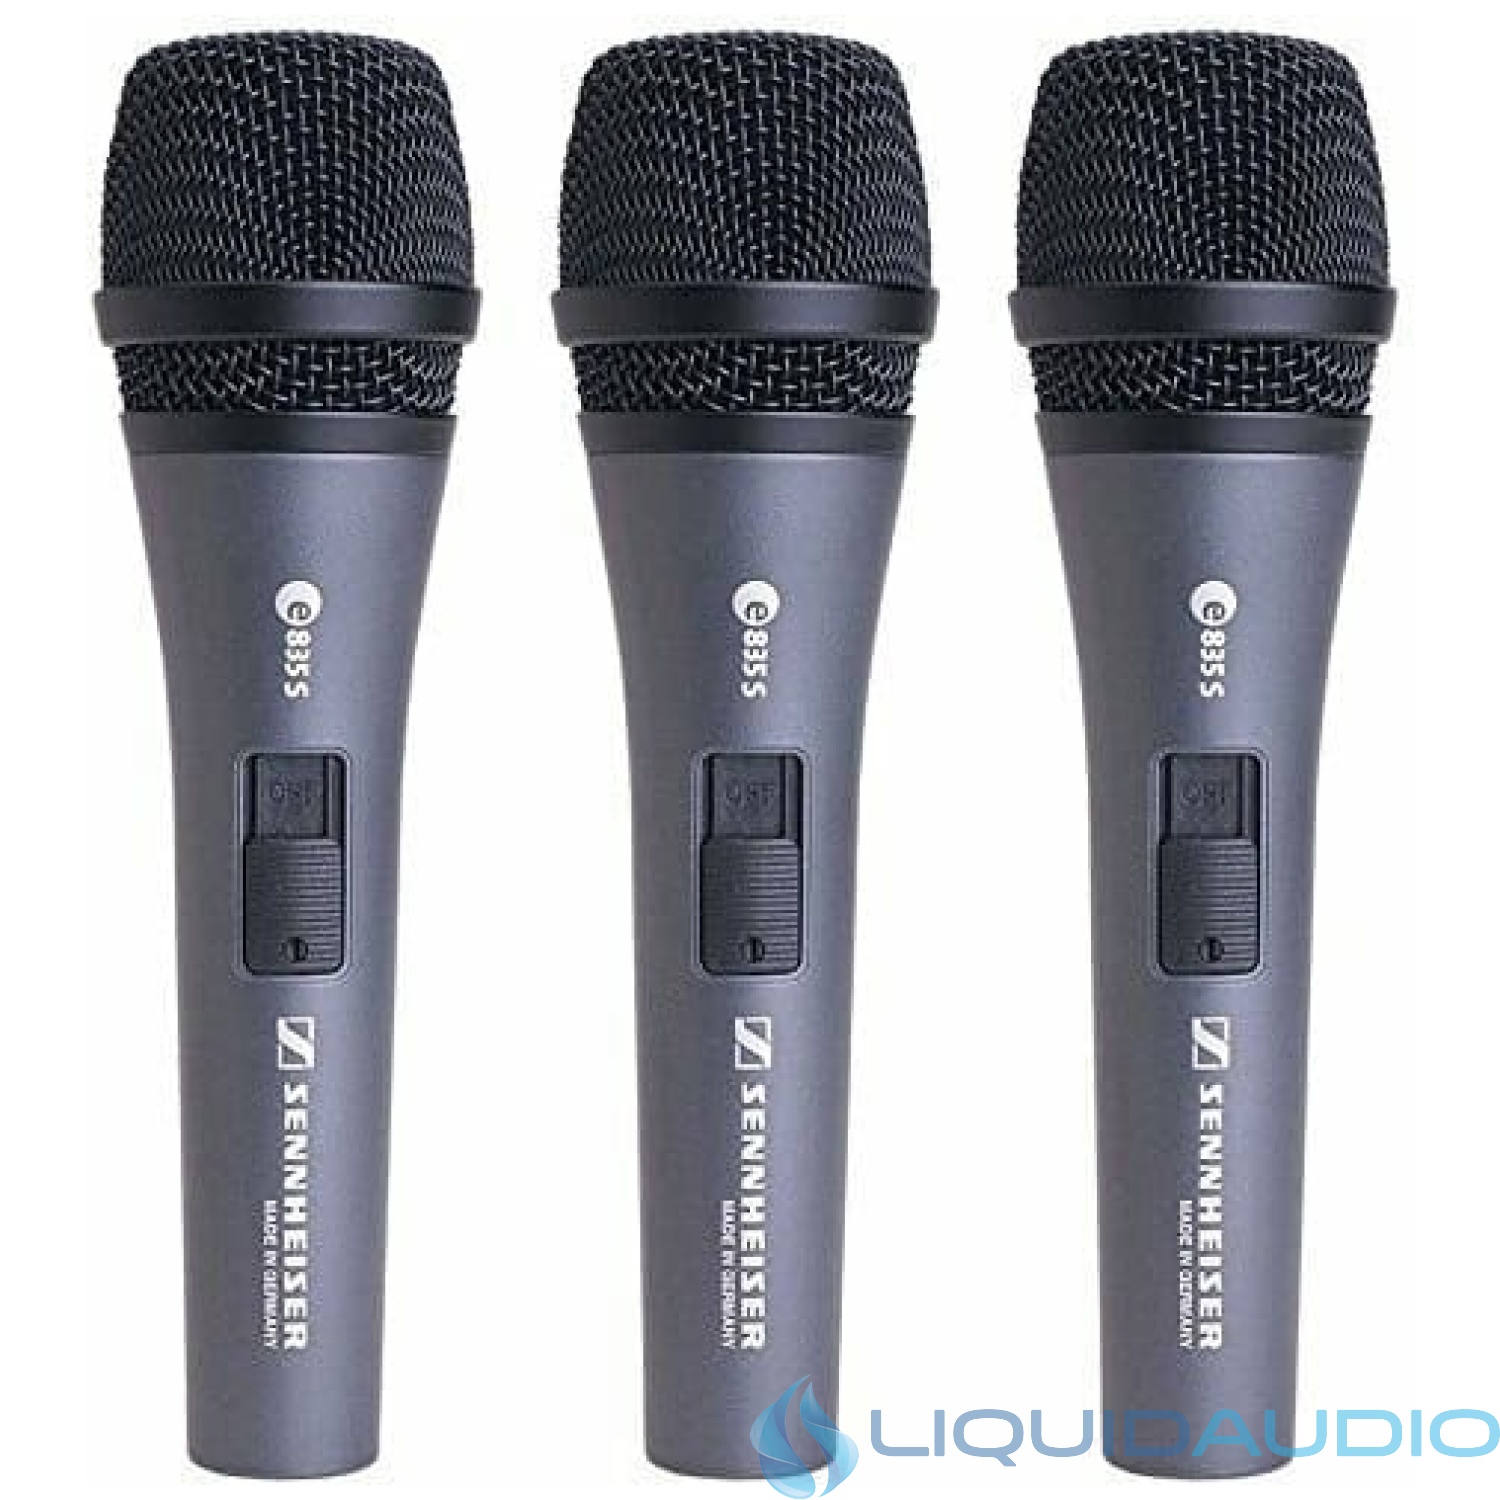 Sennheiser e835 S (3-pack) - with On/Off Switch